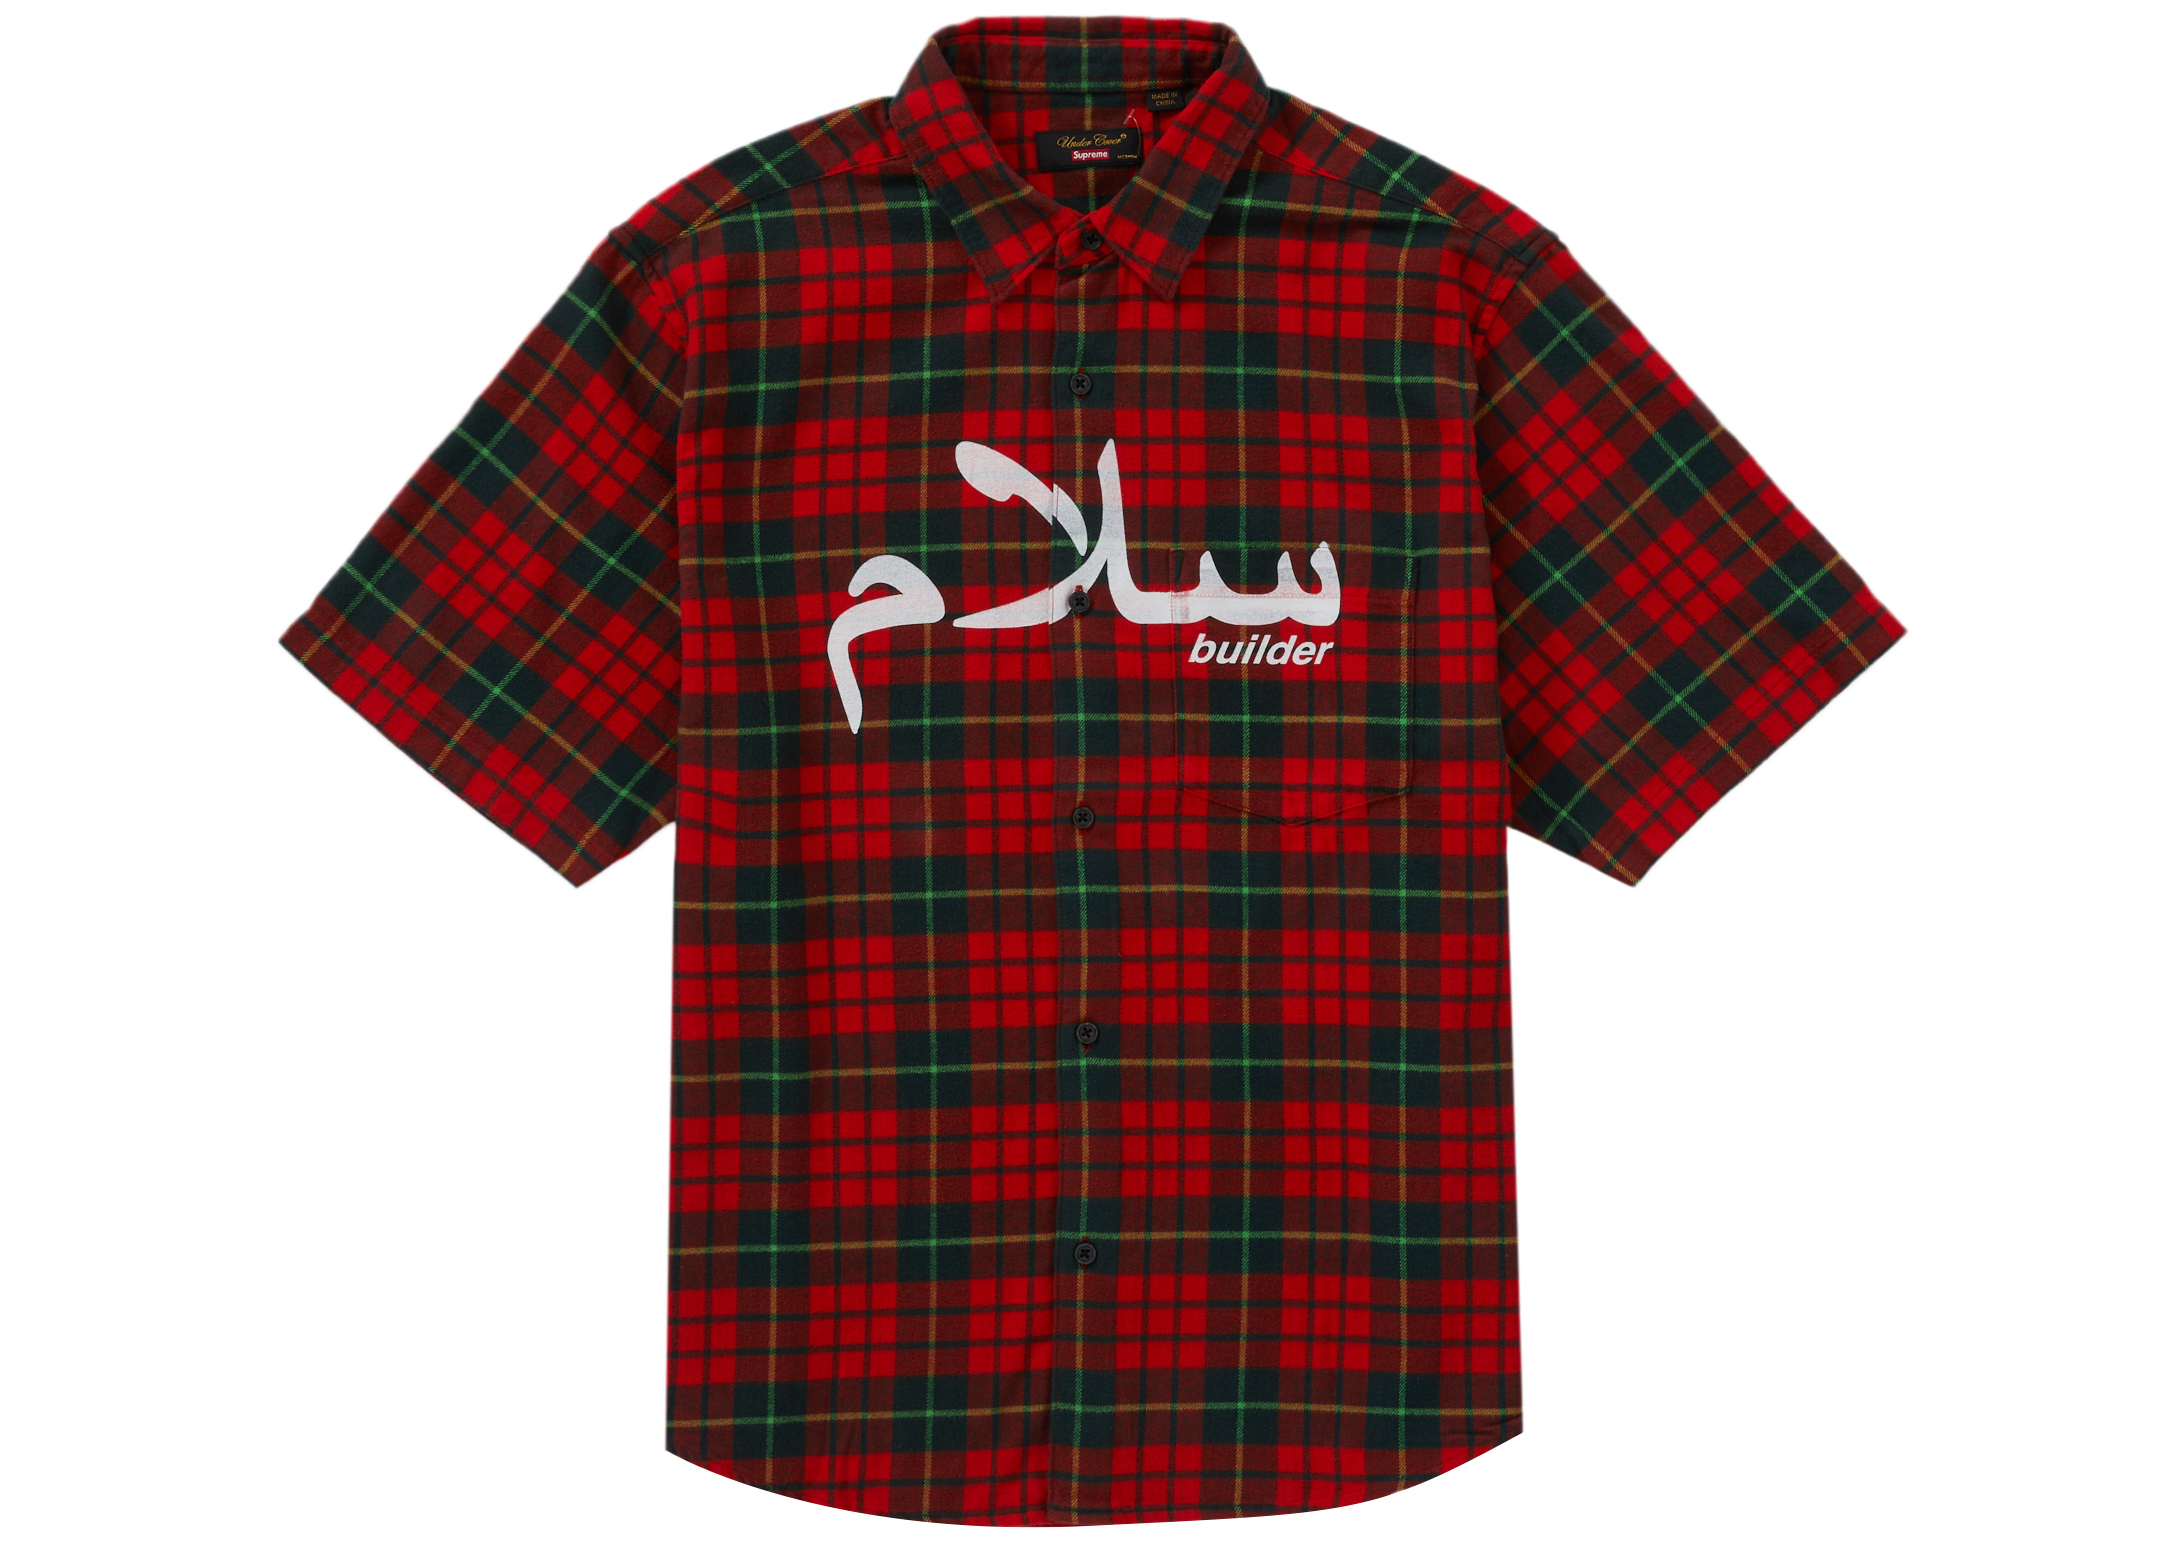 Supreme UNDERCOVER S/S Flannel Shirt Red Plaid